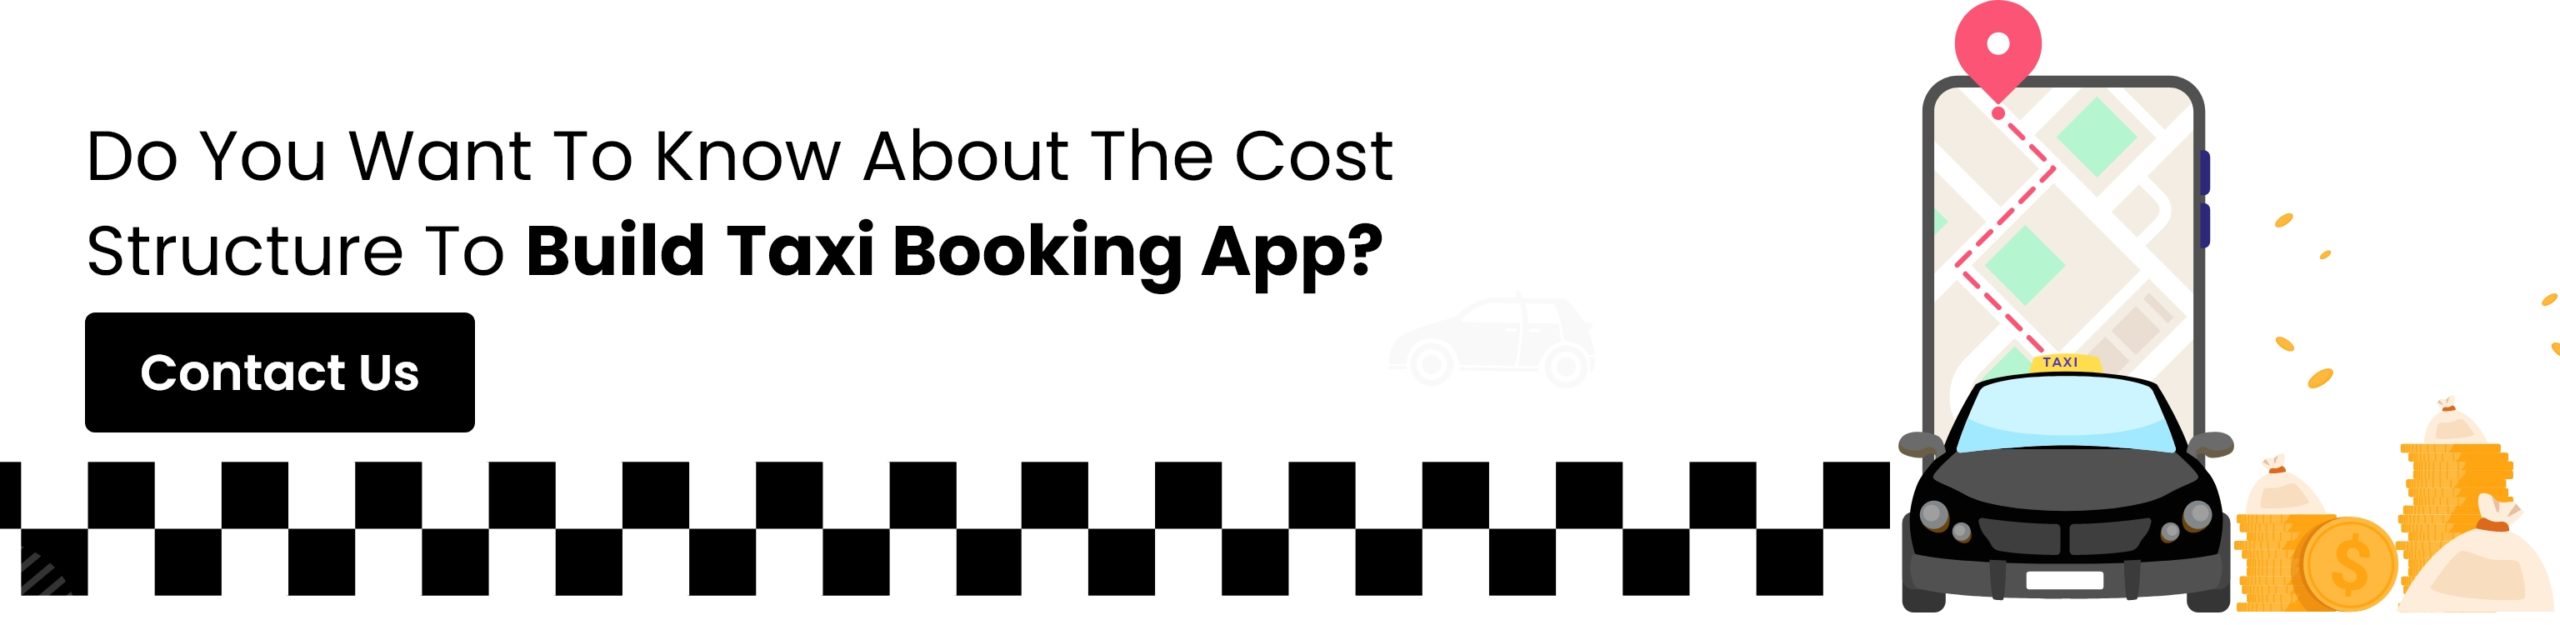 cost of taxi booking app